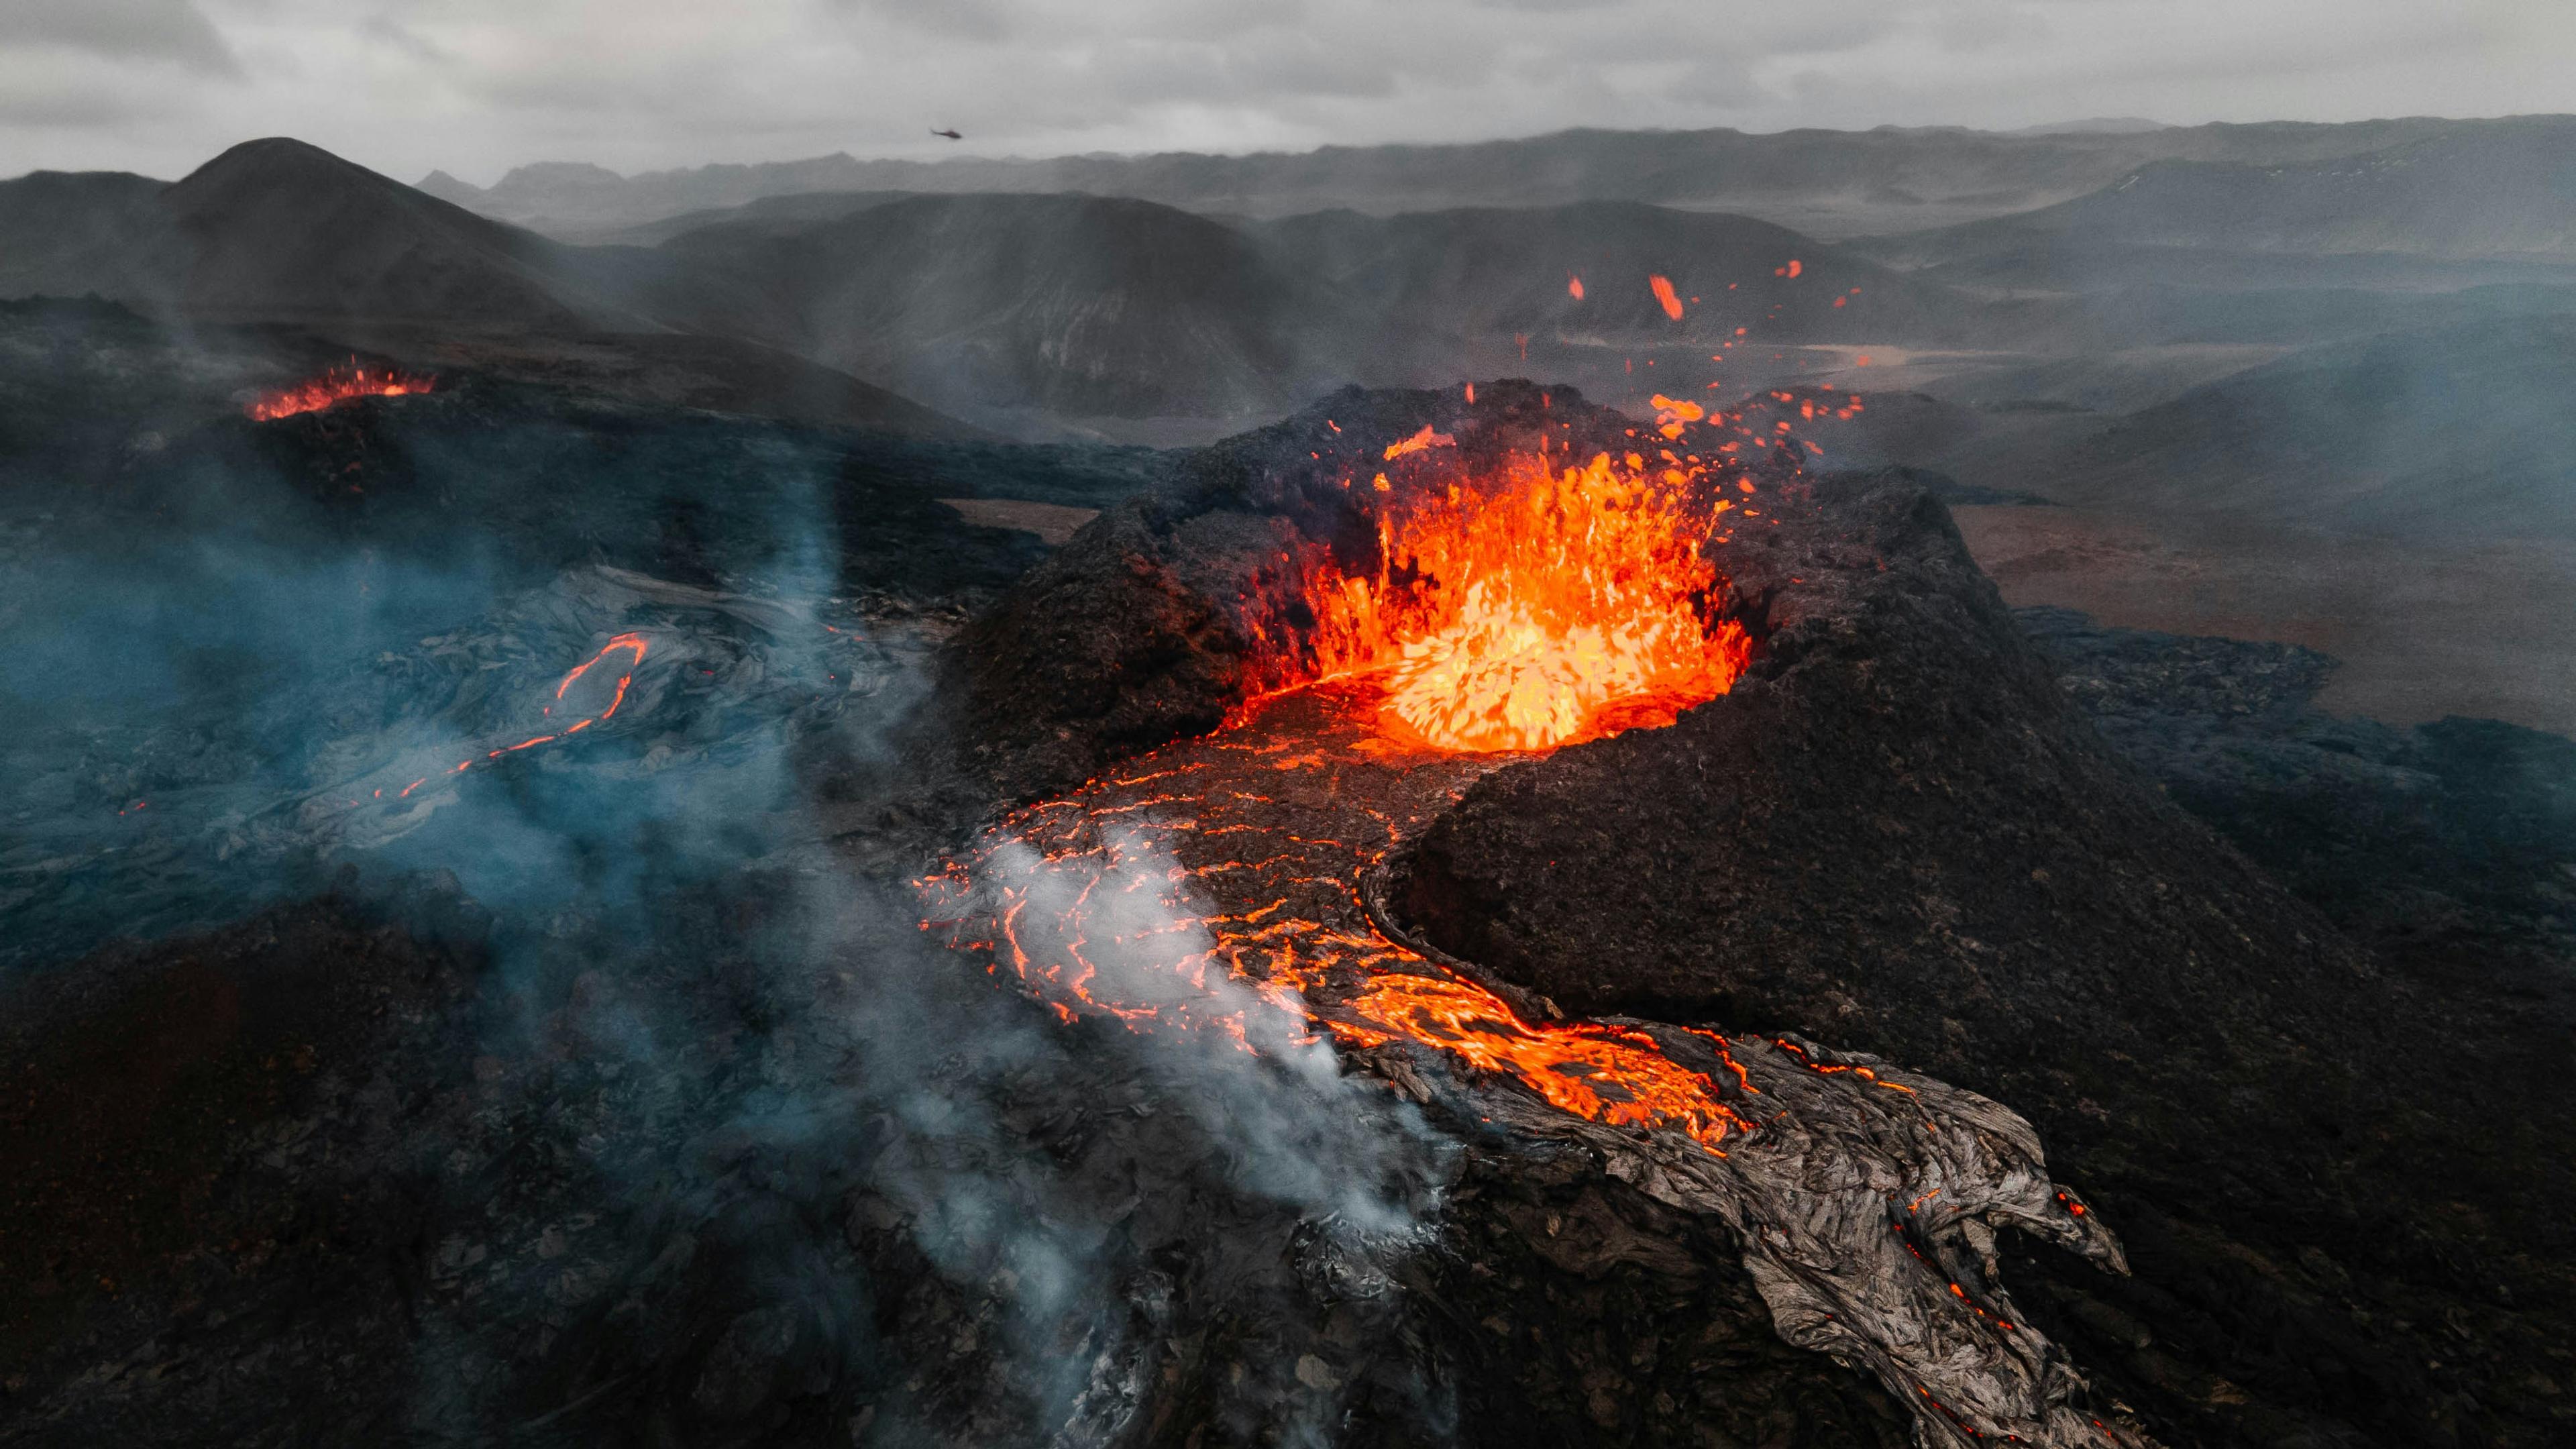 Aerial shot of a fiery volcanic eruption with molten lava flows and smoke in a mountainous terrain.